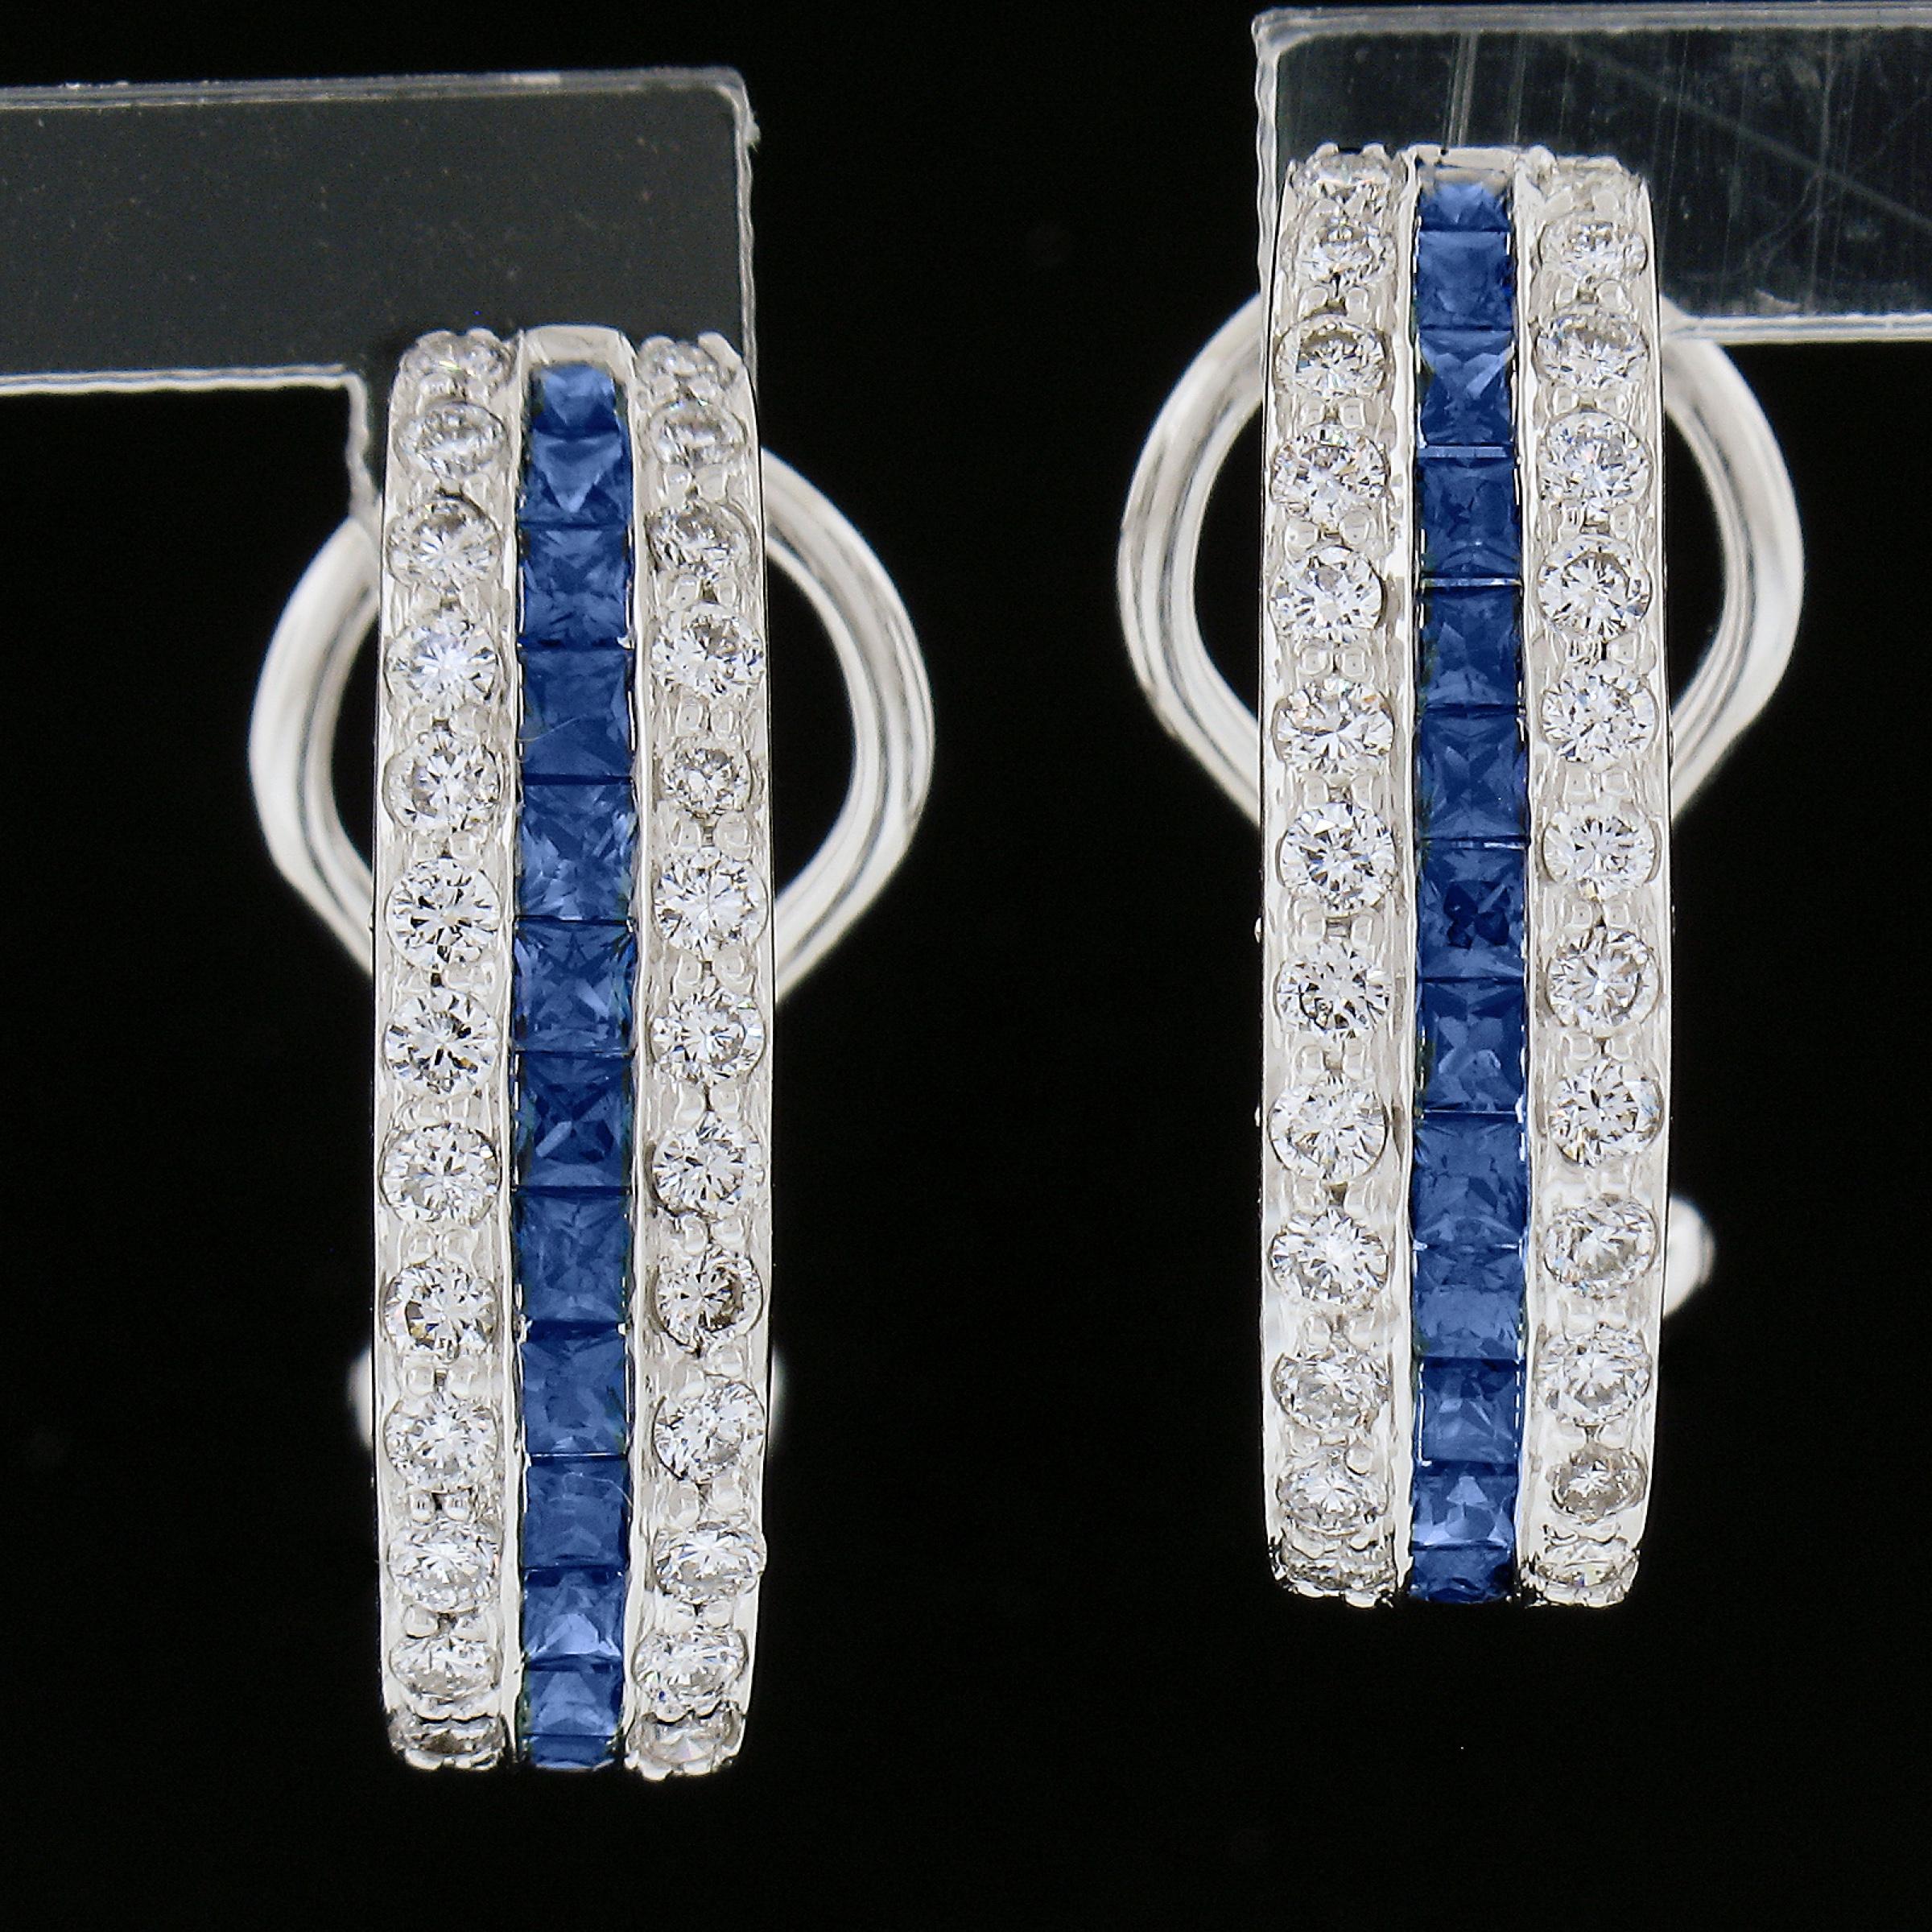 --Stone(s):--
(86) Natural Genuine Diamonds - Round Brilliant Cut - Pavé Set - VS1-SI1 Clarity - G-I Color - 1.0ctw (approx.)
(26) Natural Genuine Sapphire - Square Cut - Channel Set - Very Nice Blue Color - 0.8 to 1ctw (approx.) (TOP QUALITY